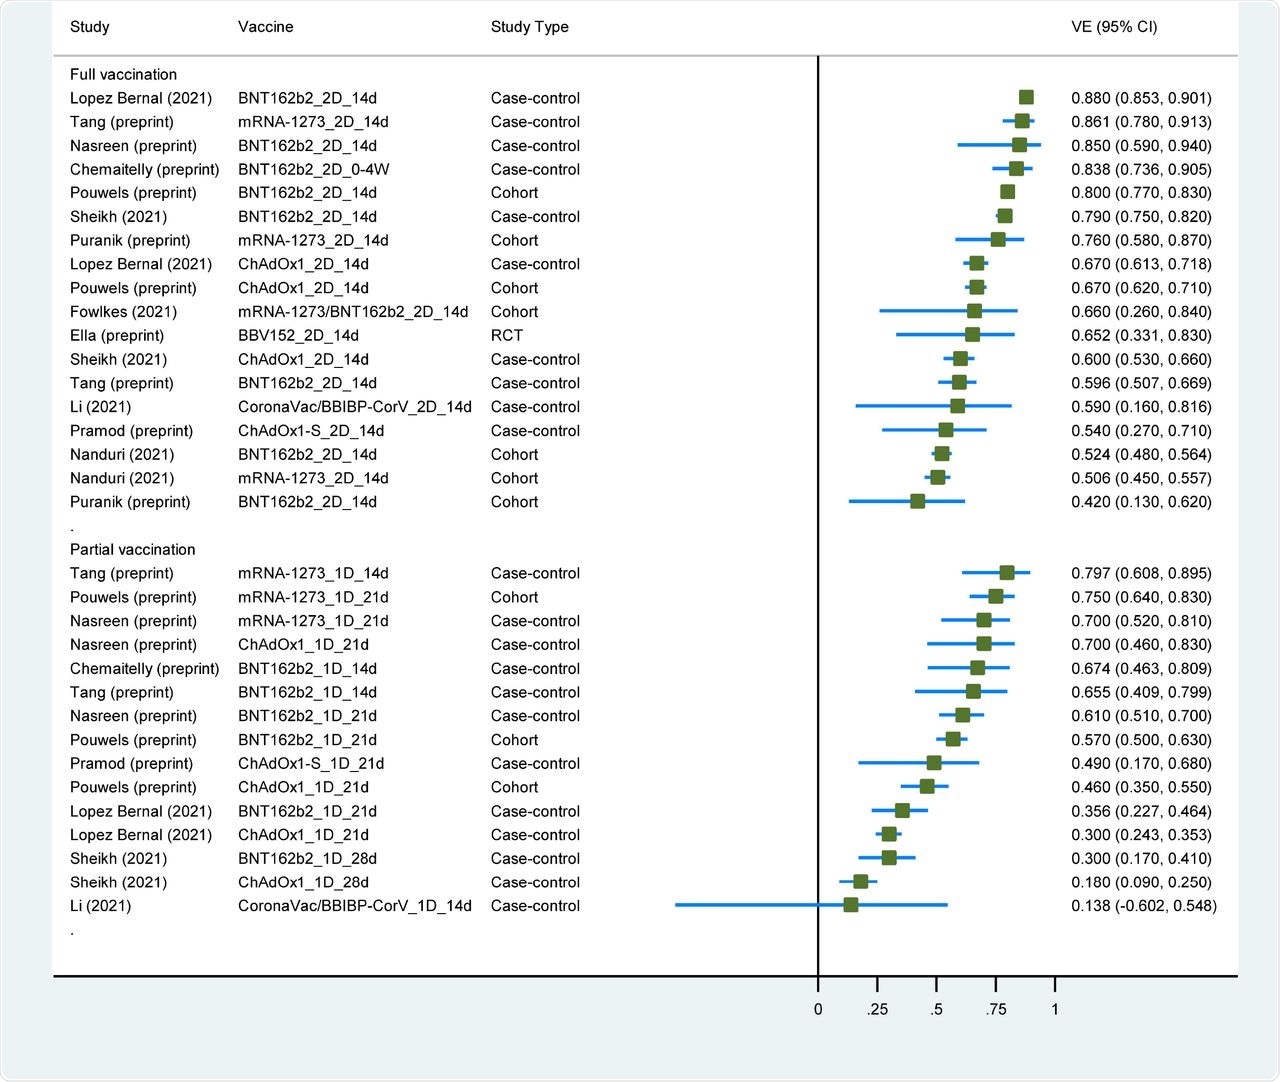 Forest plot showing vaccine effectiveness of COVID-19 vaccines against Delta variant. Abbreviations: VE, vaccine effectiveness; CI, confidence interval; RCT, randomized controlled trial.